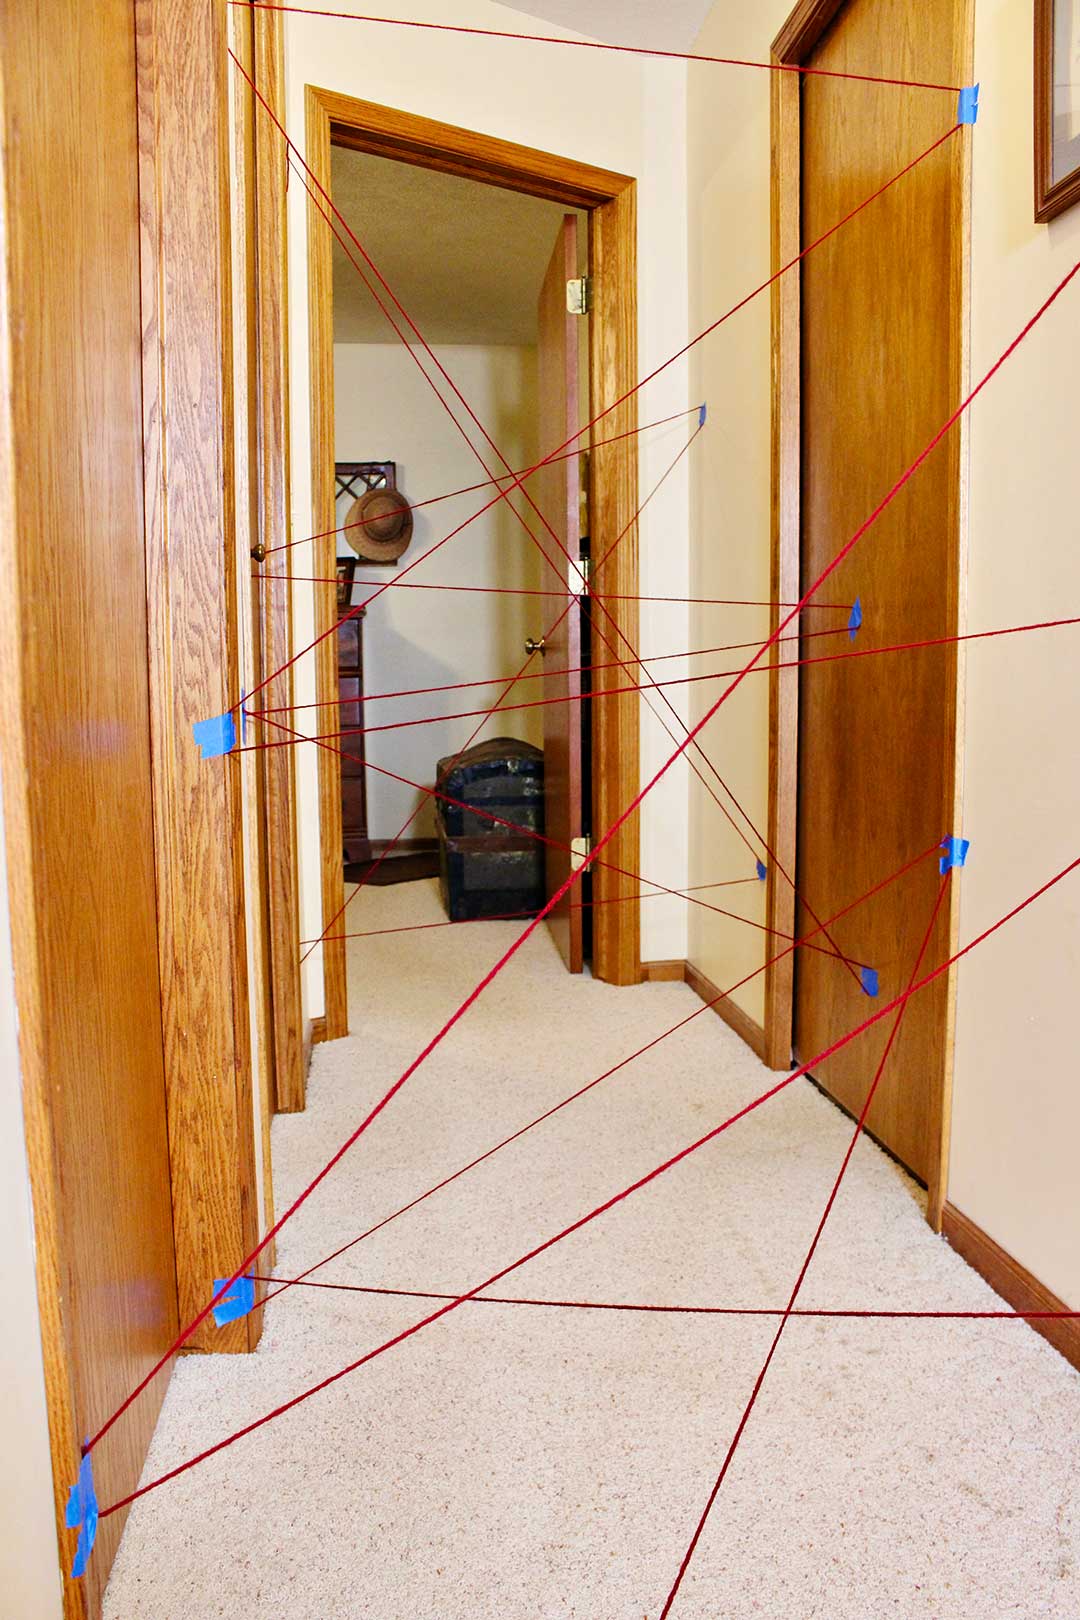 View of completed DIY Laser Maze in a hallway with off white carpet and wooden doors.